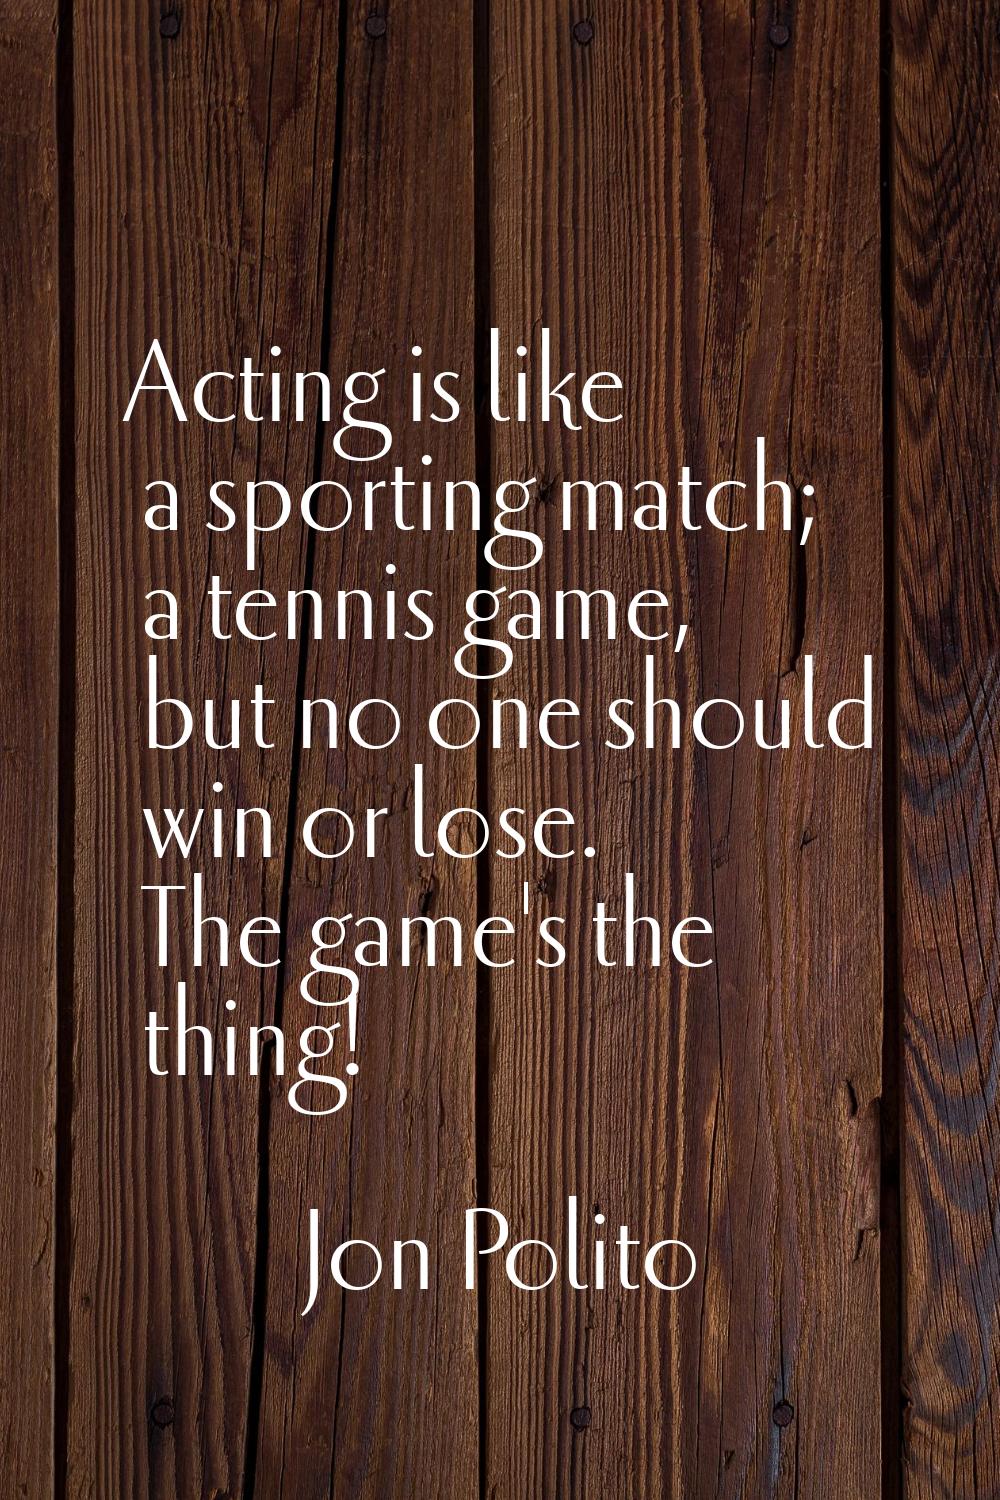 Acting is like a sporting match; a tennis game, but no one should win or lose. The game's the thing